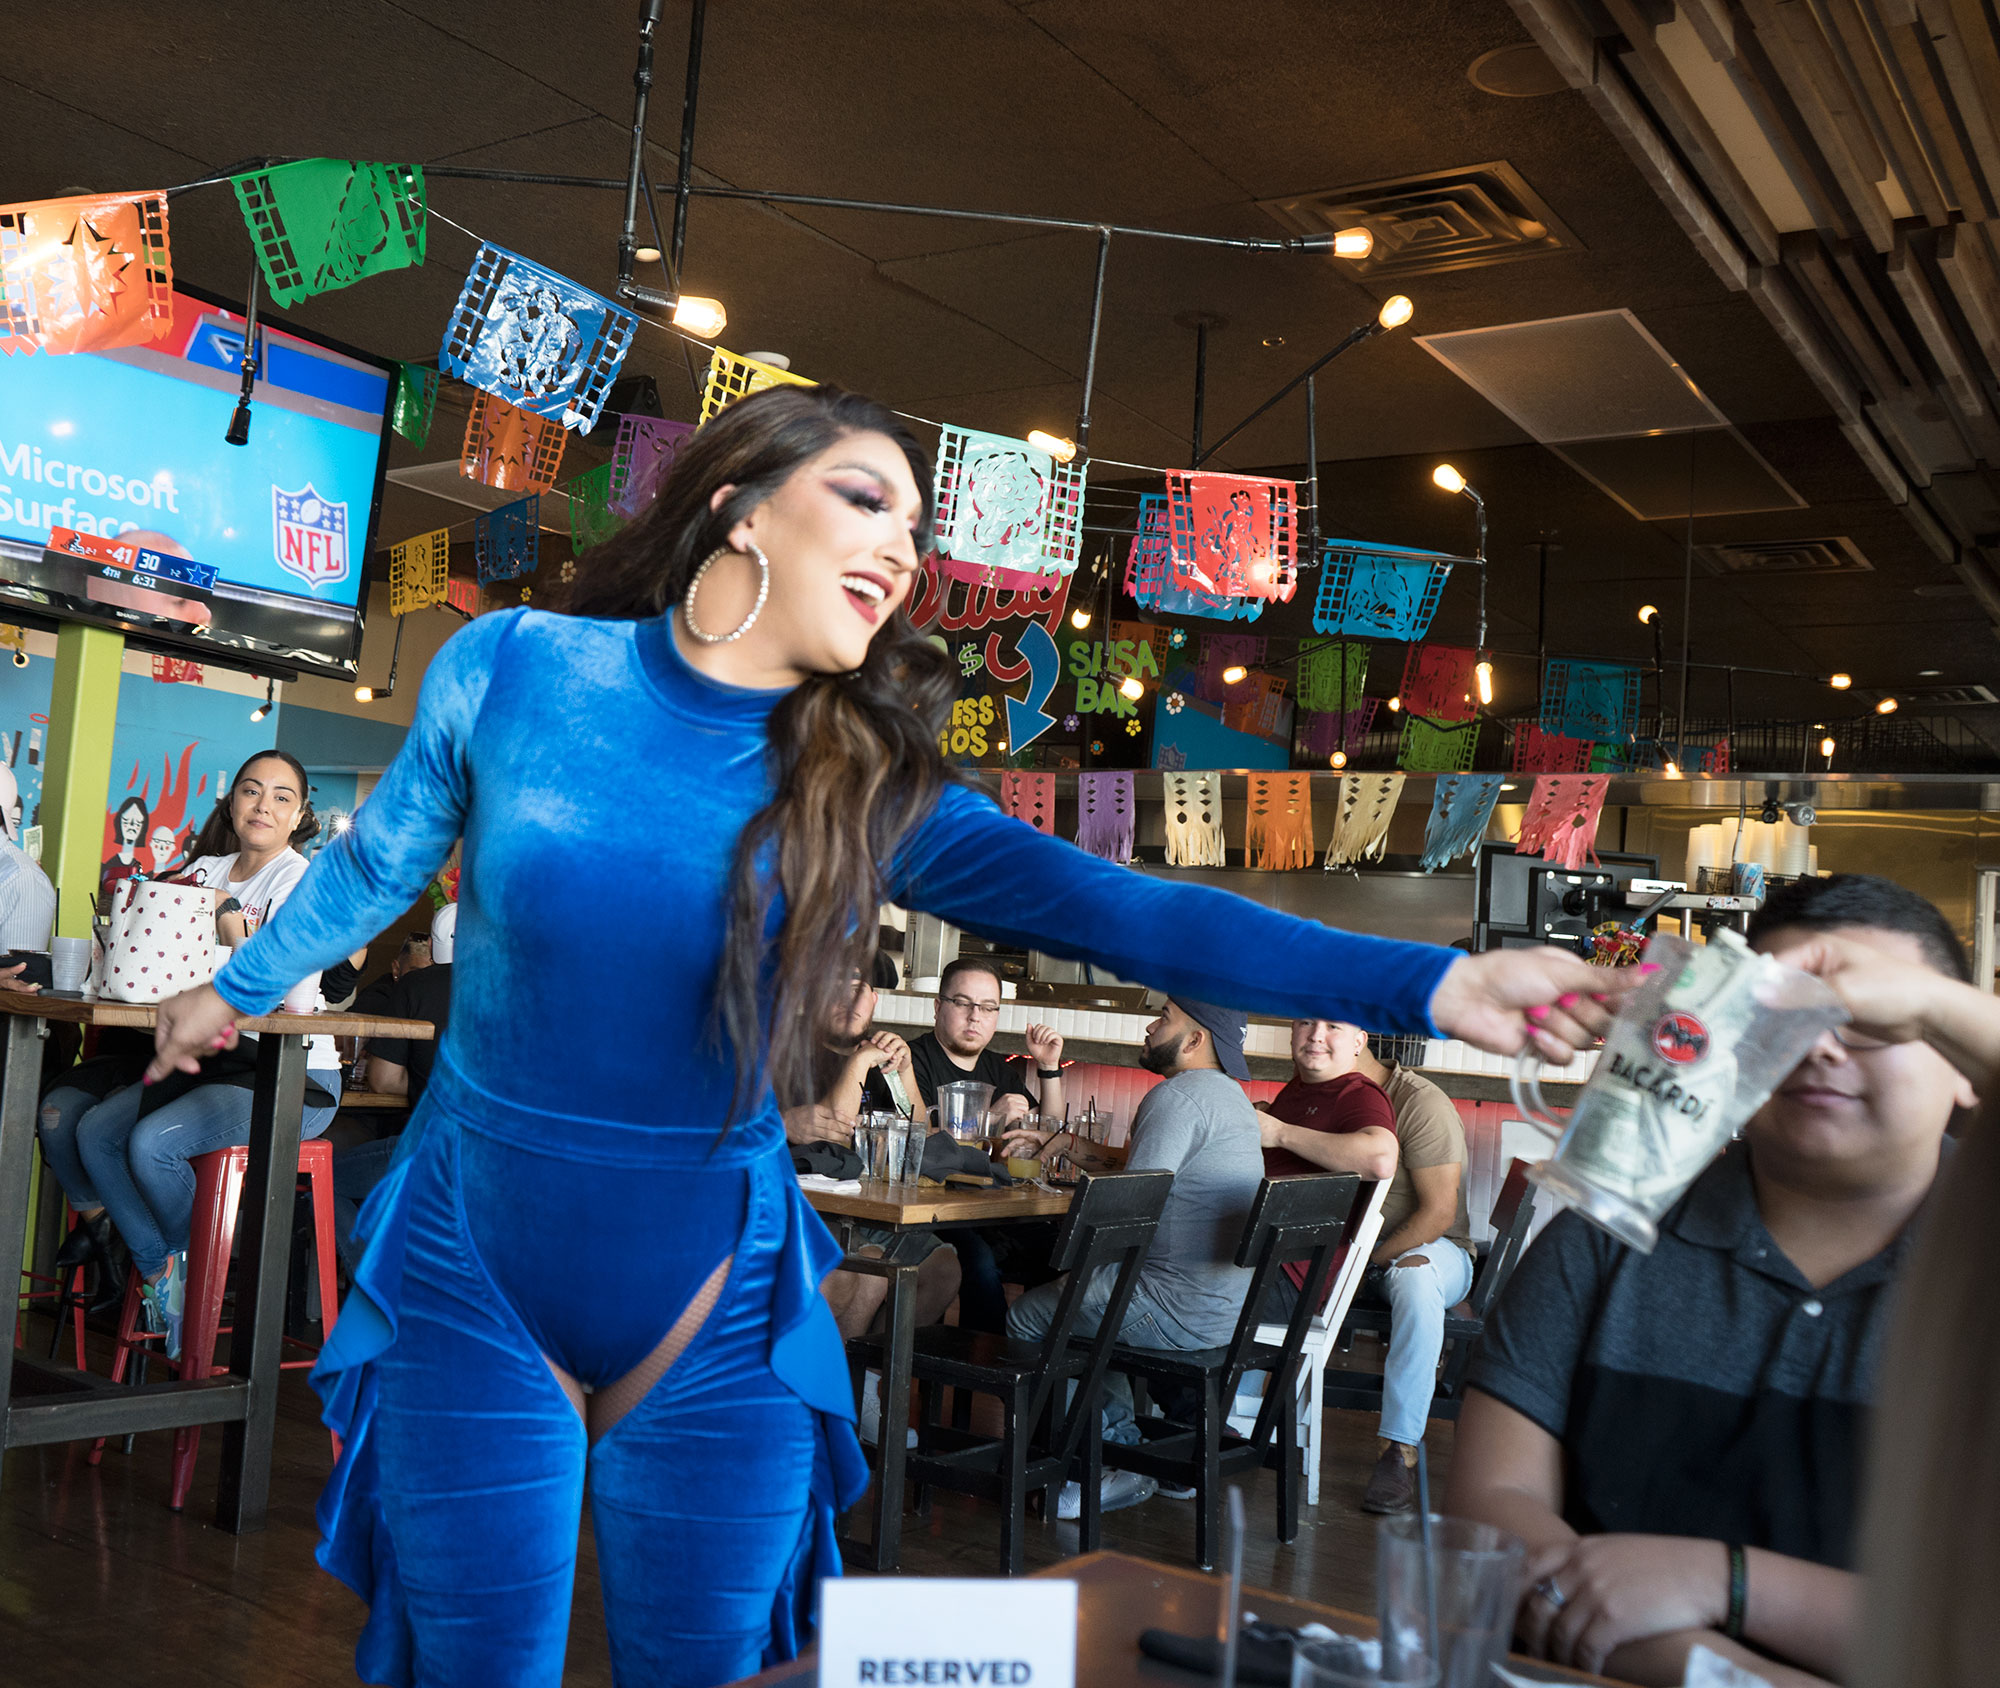 Dallas drag queen Adecia Love performing at TNT Tacos and Tequila brunch.